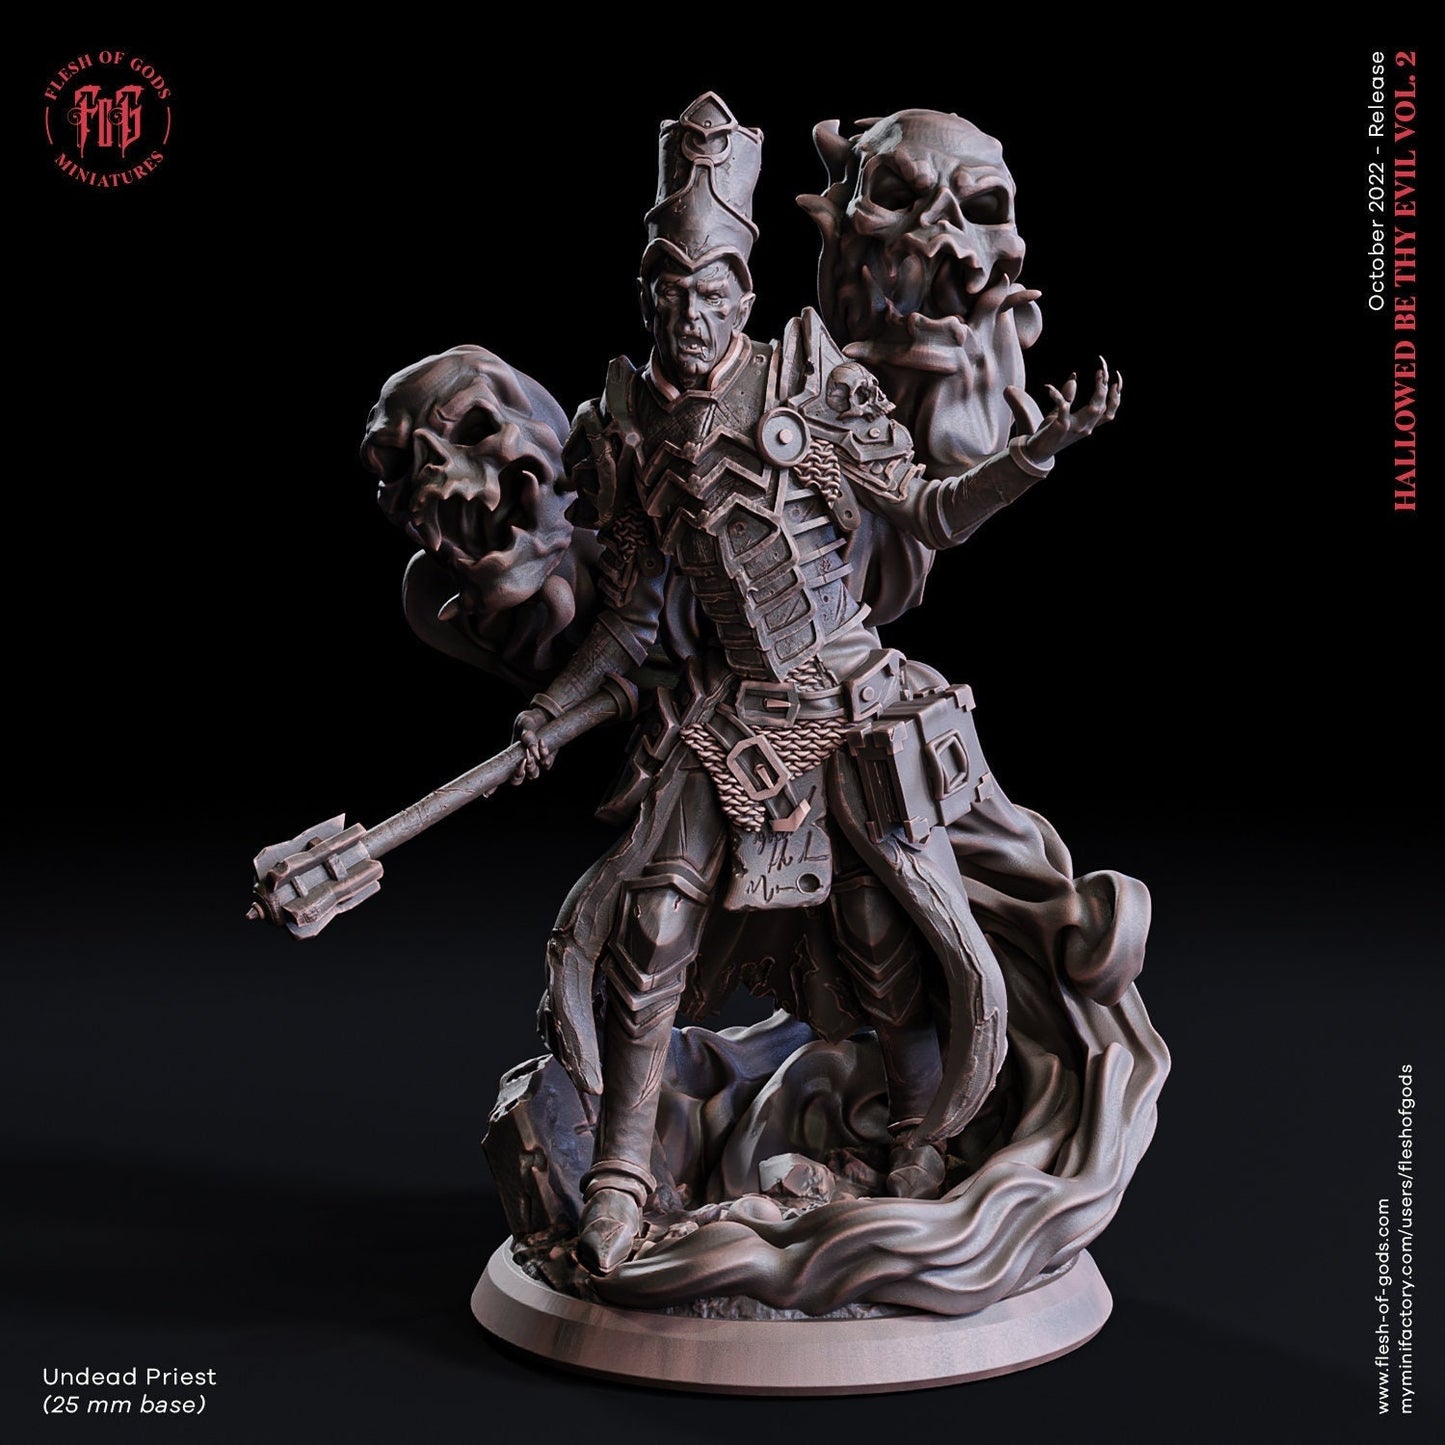 The Undead Priest | Flesh of Gods | Enemy | 3D Printed Resin Miniature | Dungeons and Dragons | Pathfinder | Tabletop Role Playing | D&D